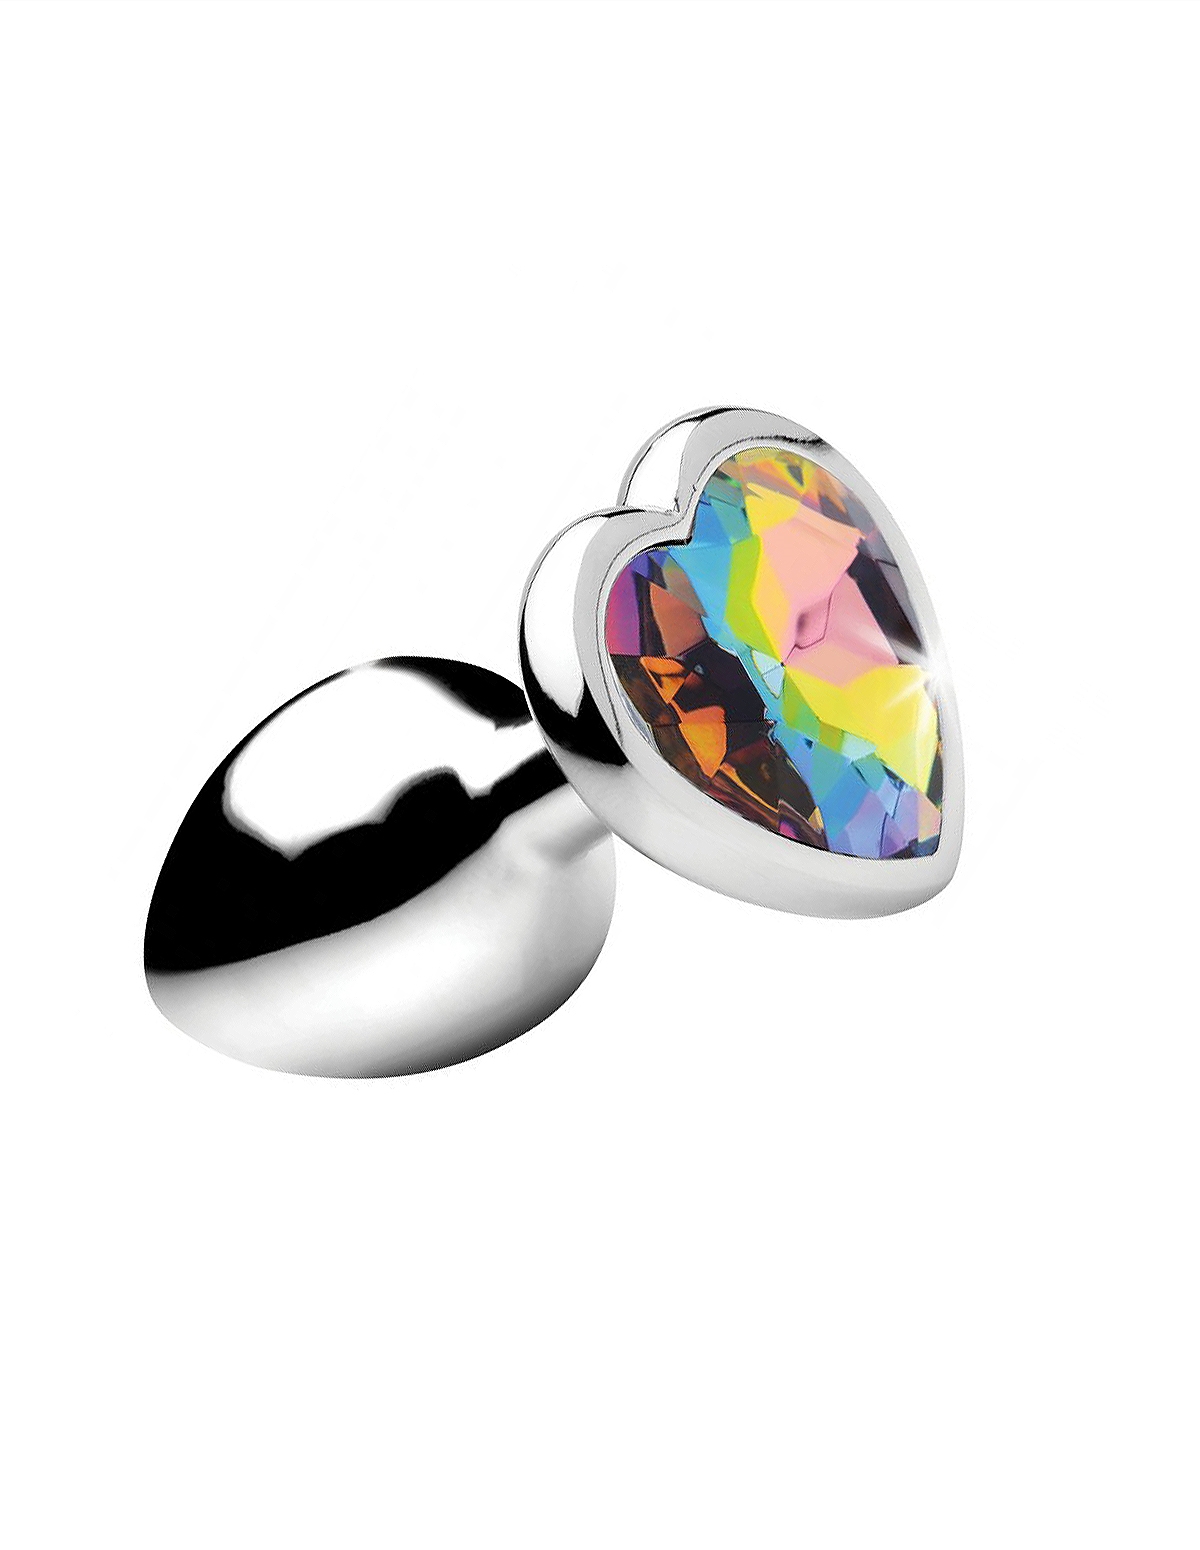 Small Rainbow Prism Heart Anal Plug - AG374-Small-03151 | Lover's Lane